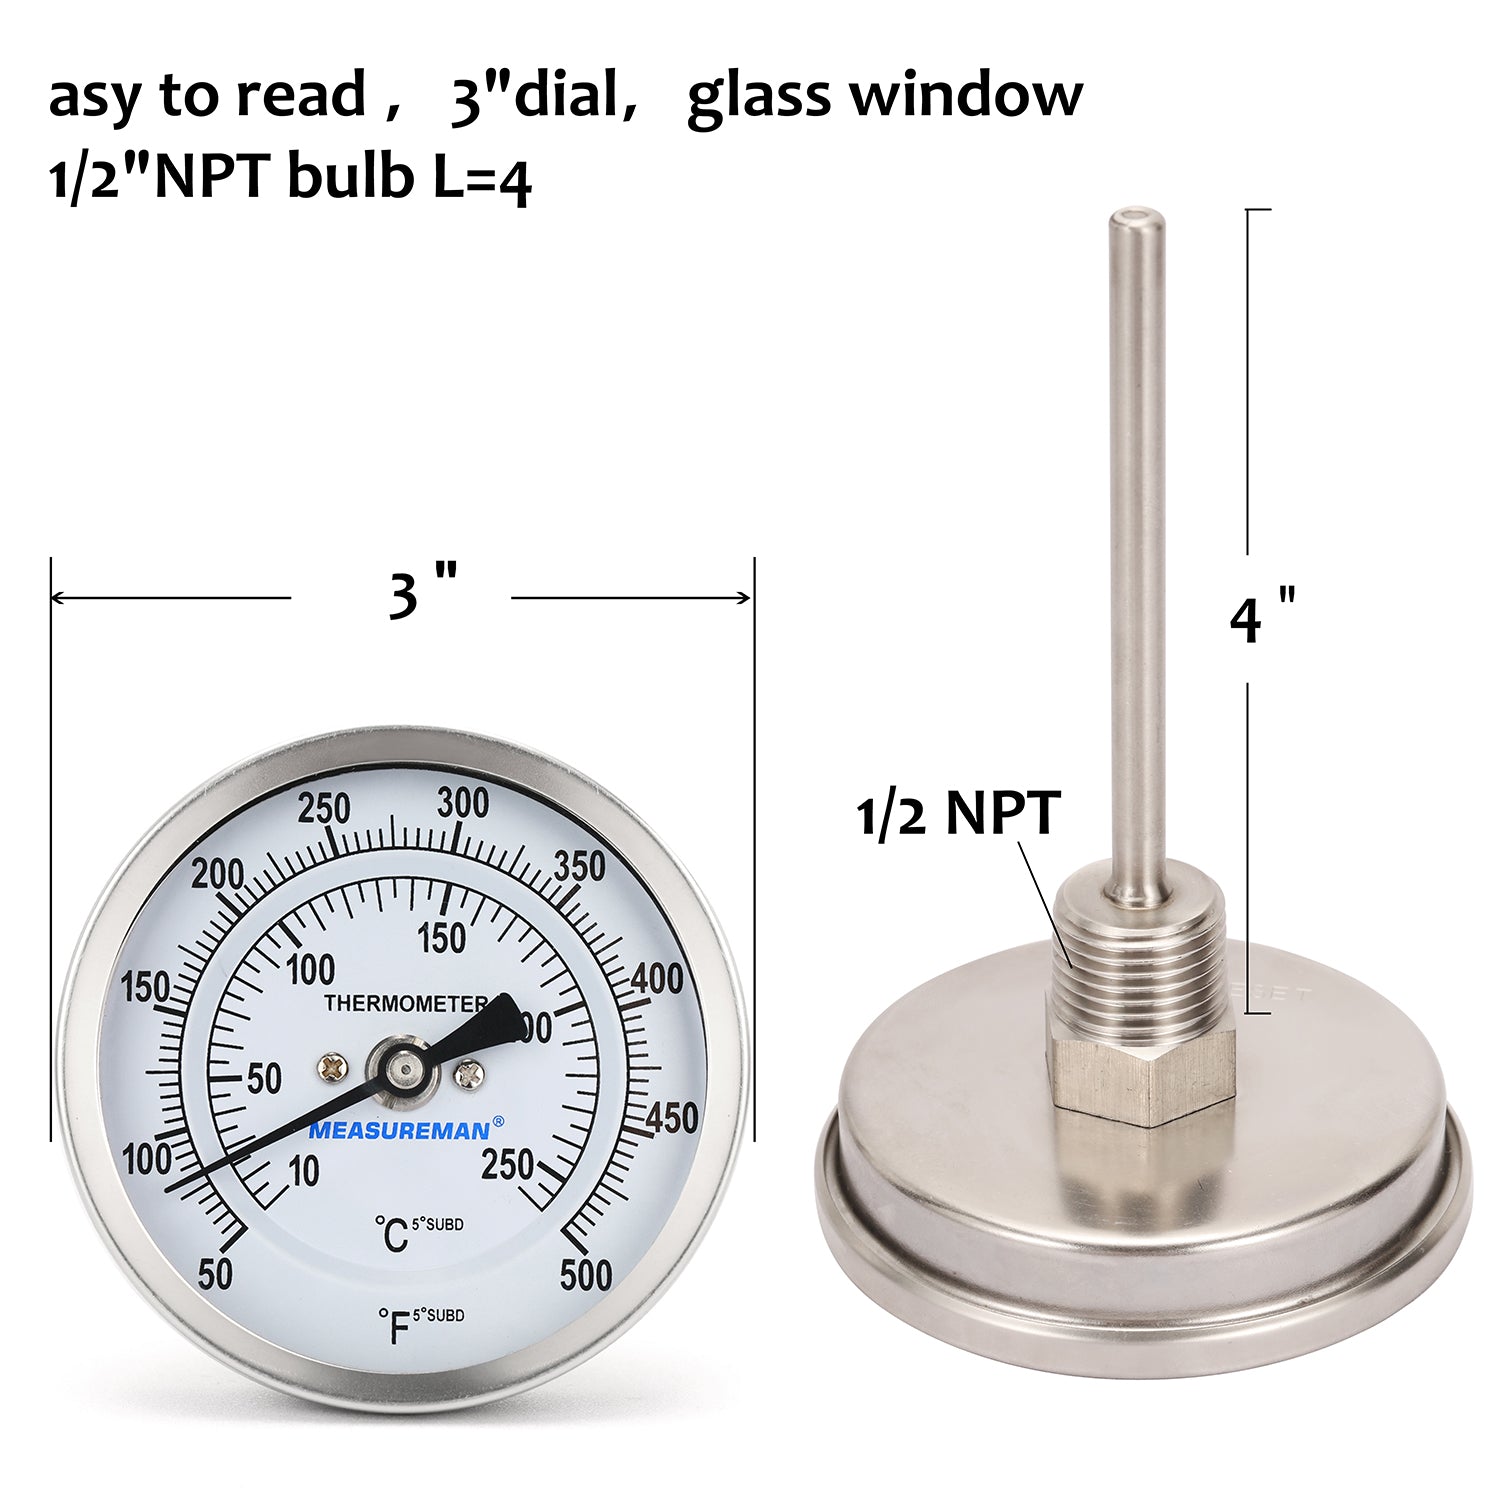 MT500 Dixon Valve Magnetic Surface Mount Thermometer with a 2 Face - 0-500  deg. F Range